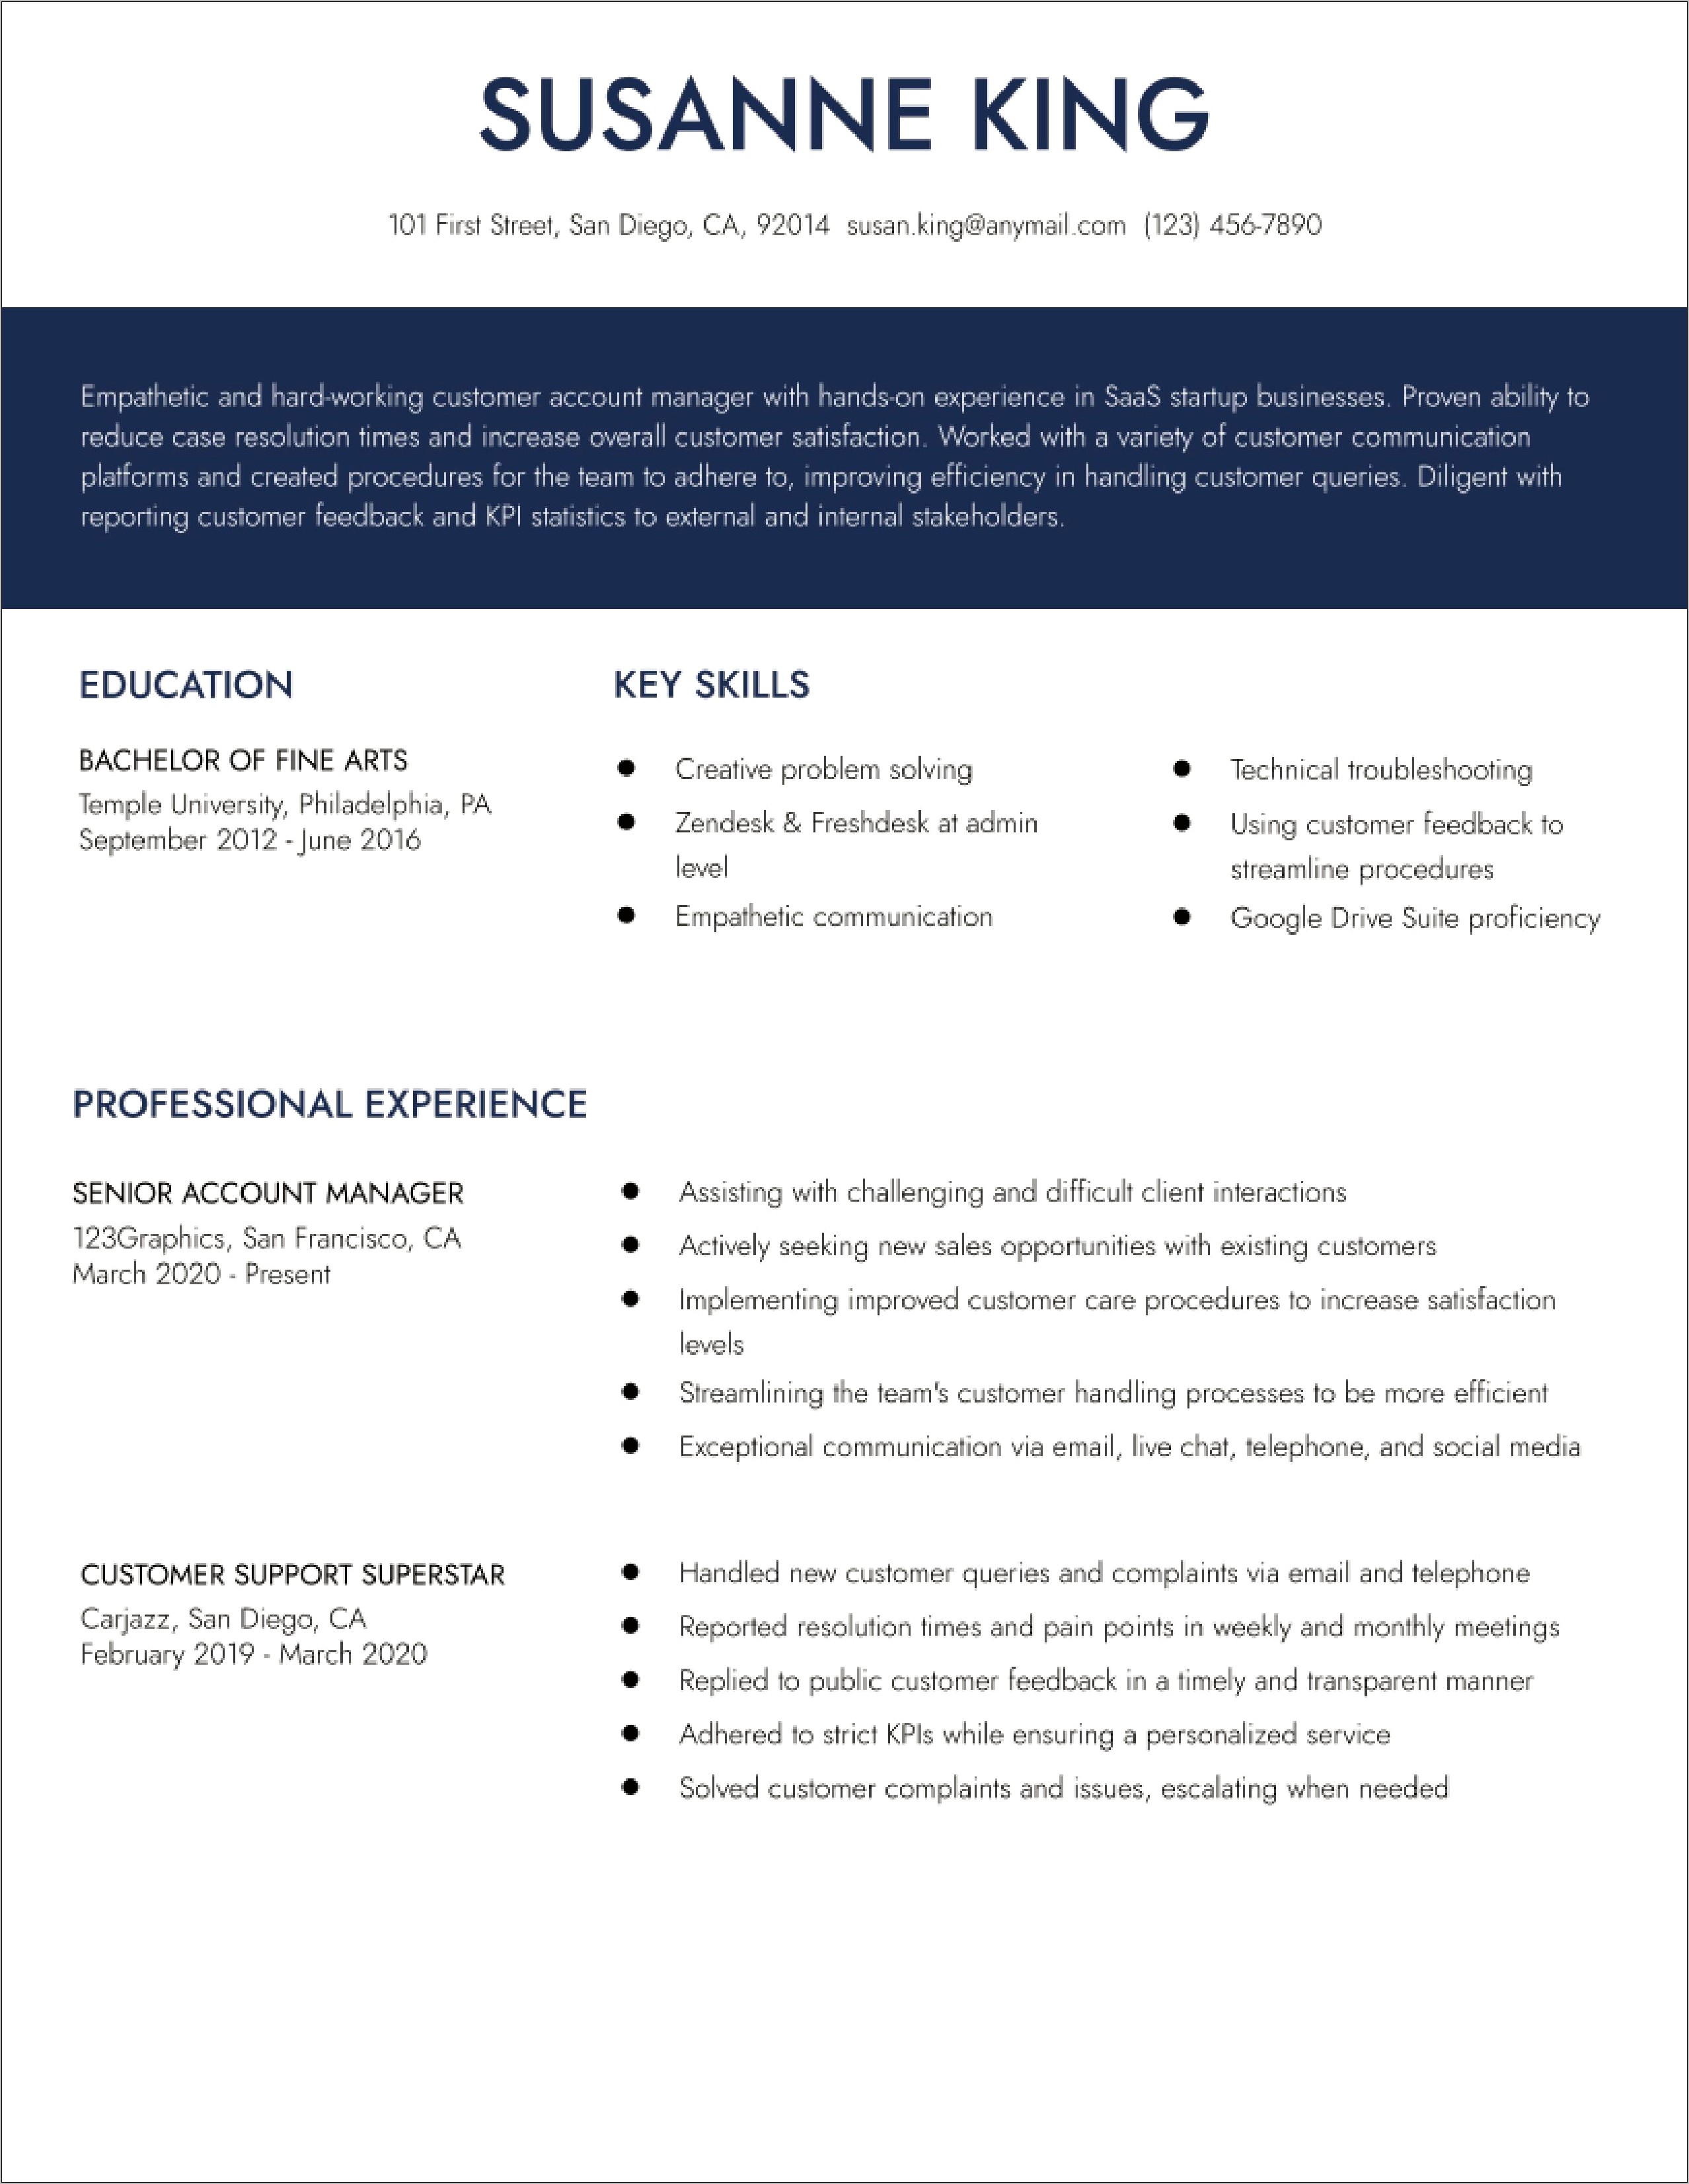 Customer Success Manager Resume Examples 2019